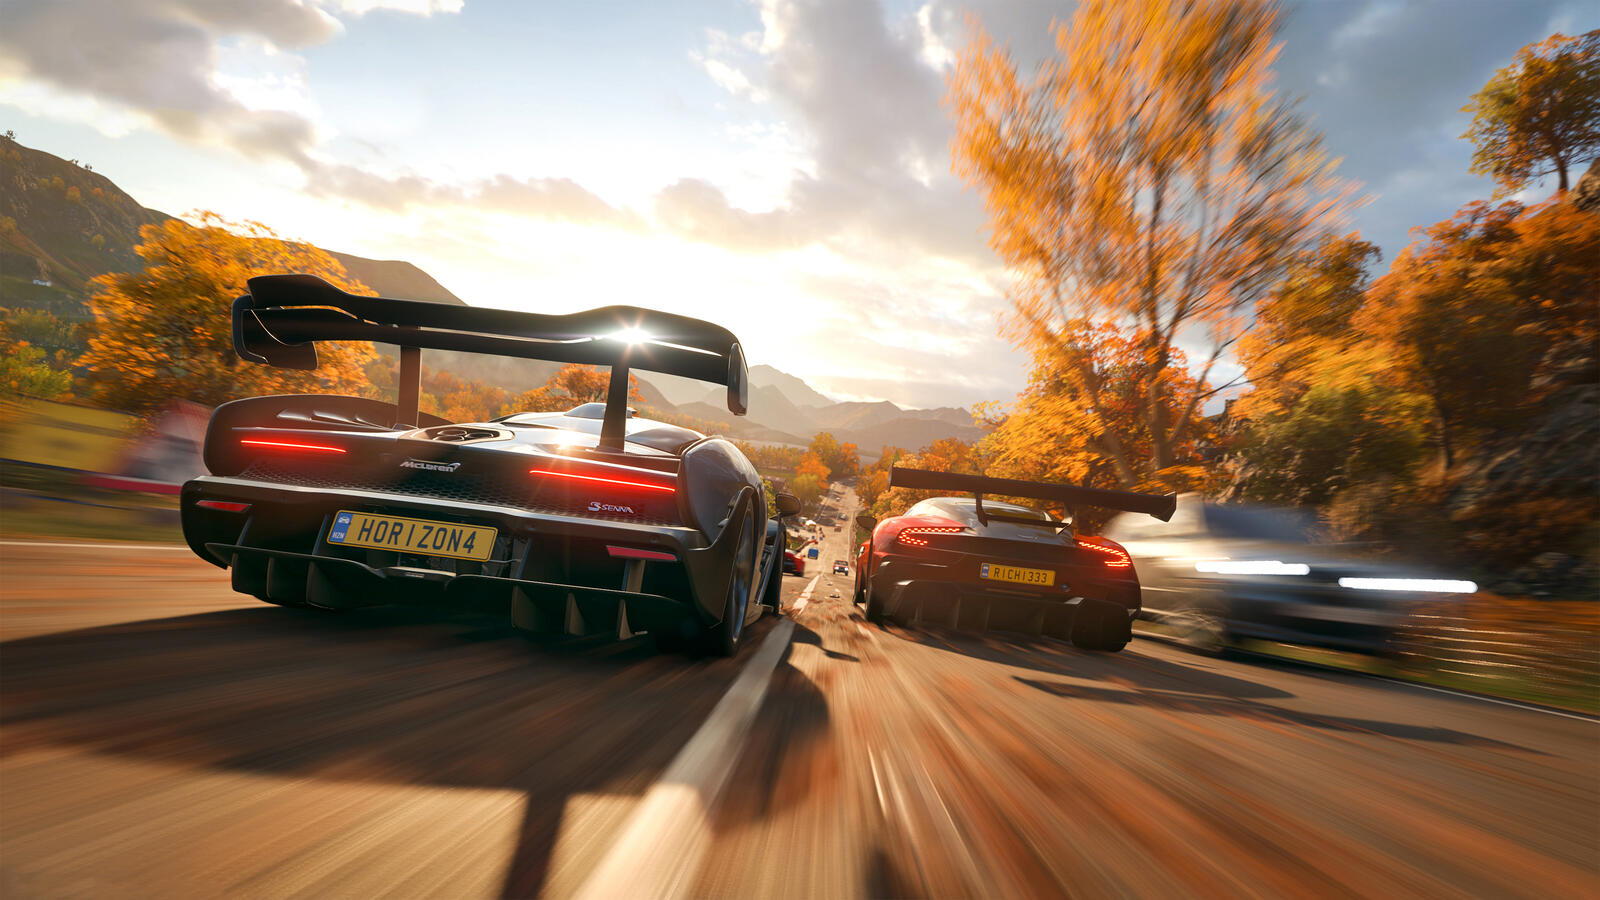 Wallpapers Forza Horizon 4 the 2018 Games games on the desktop